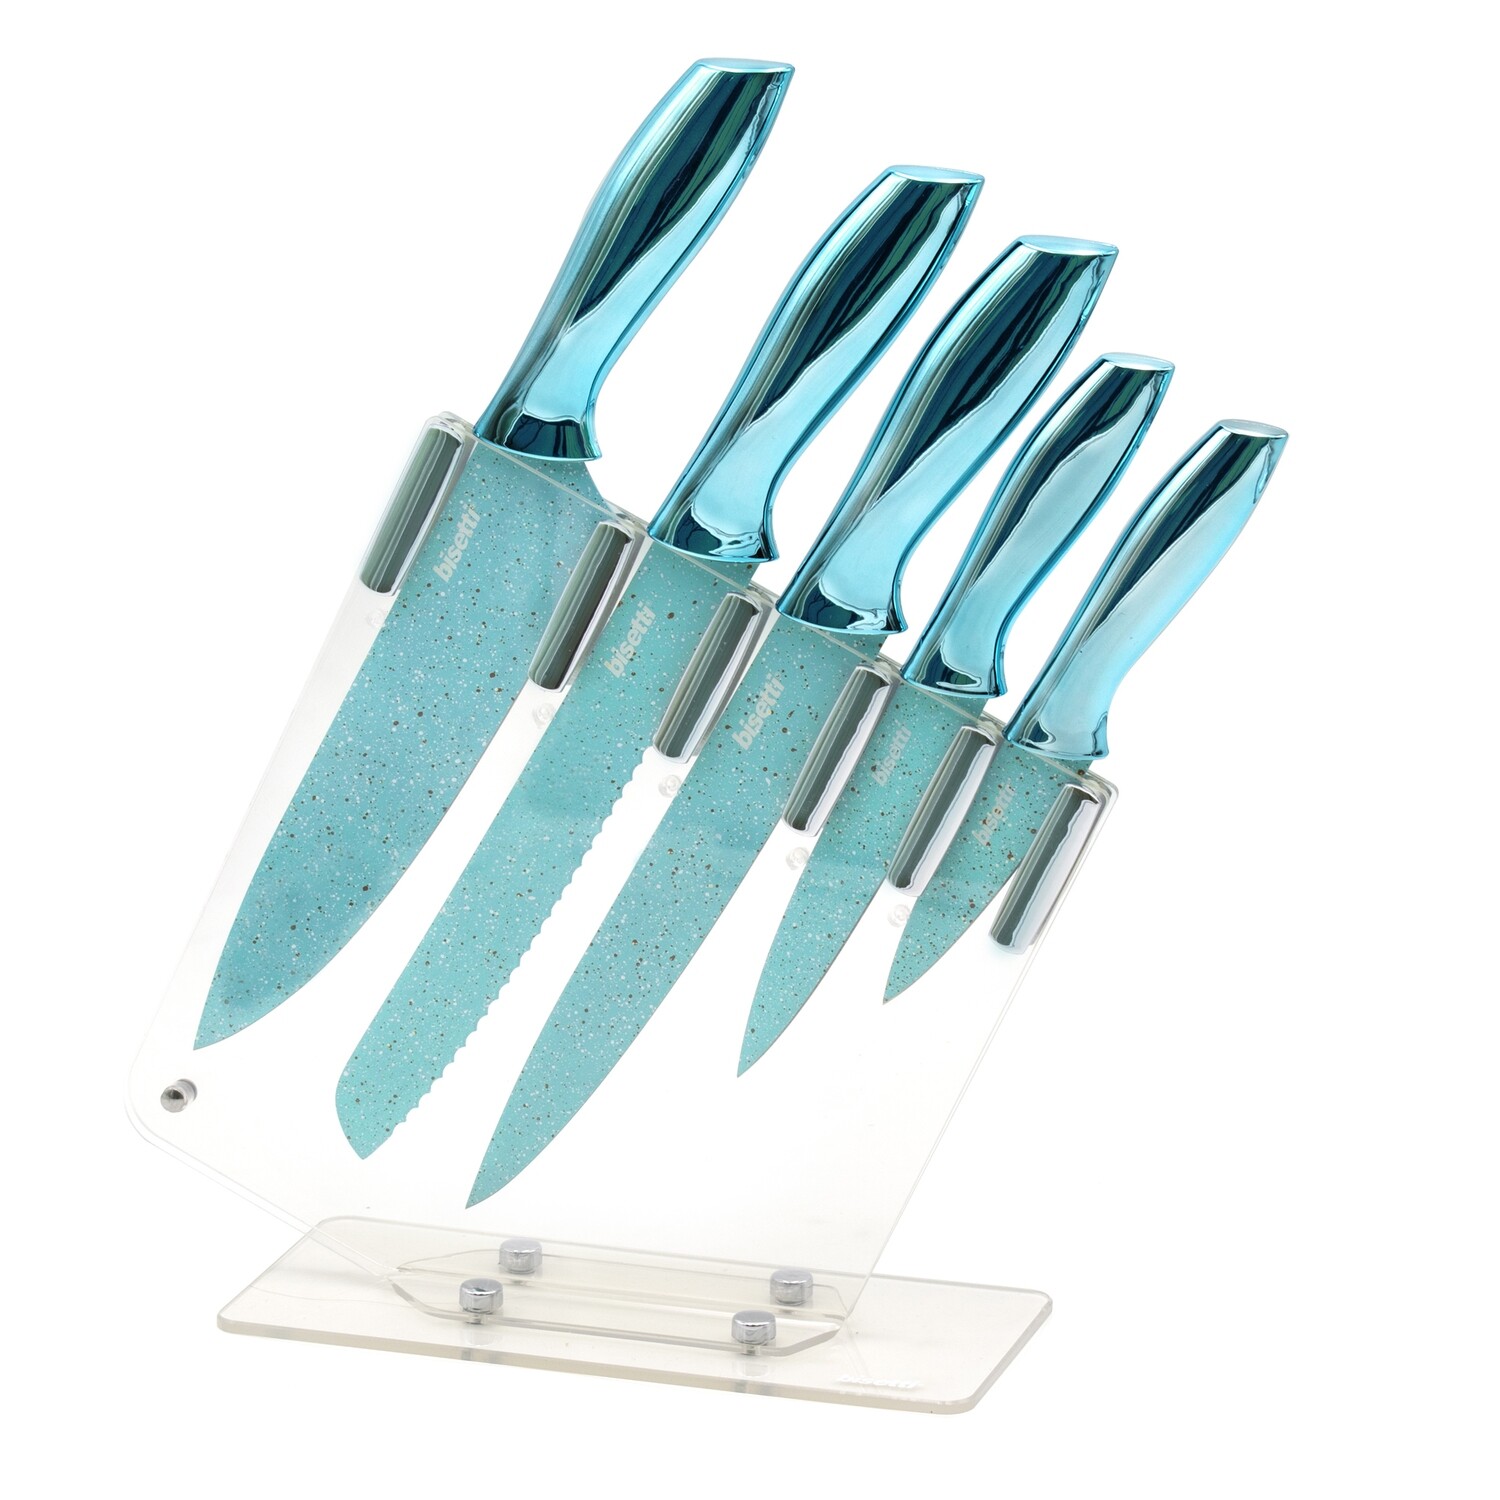 5 knives set 'Miss Gourmet' with white light blue colour handles and block